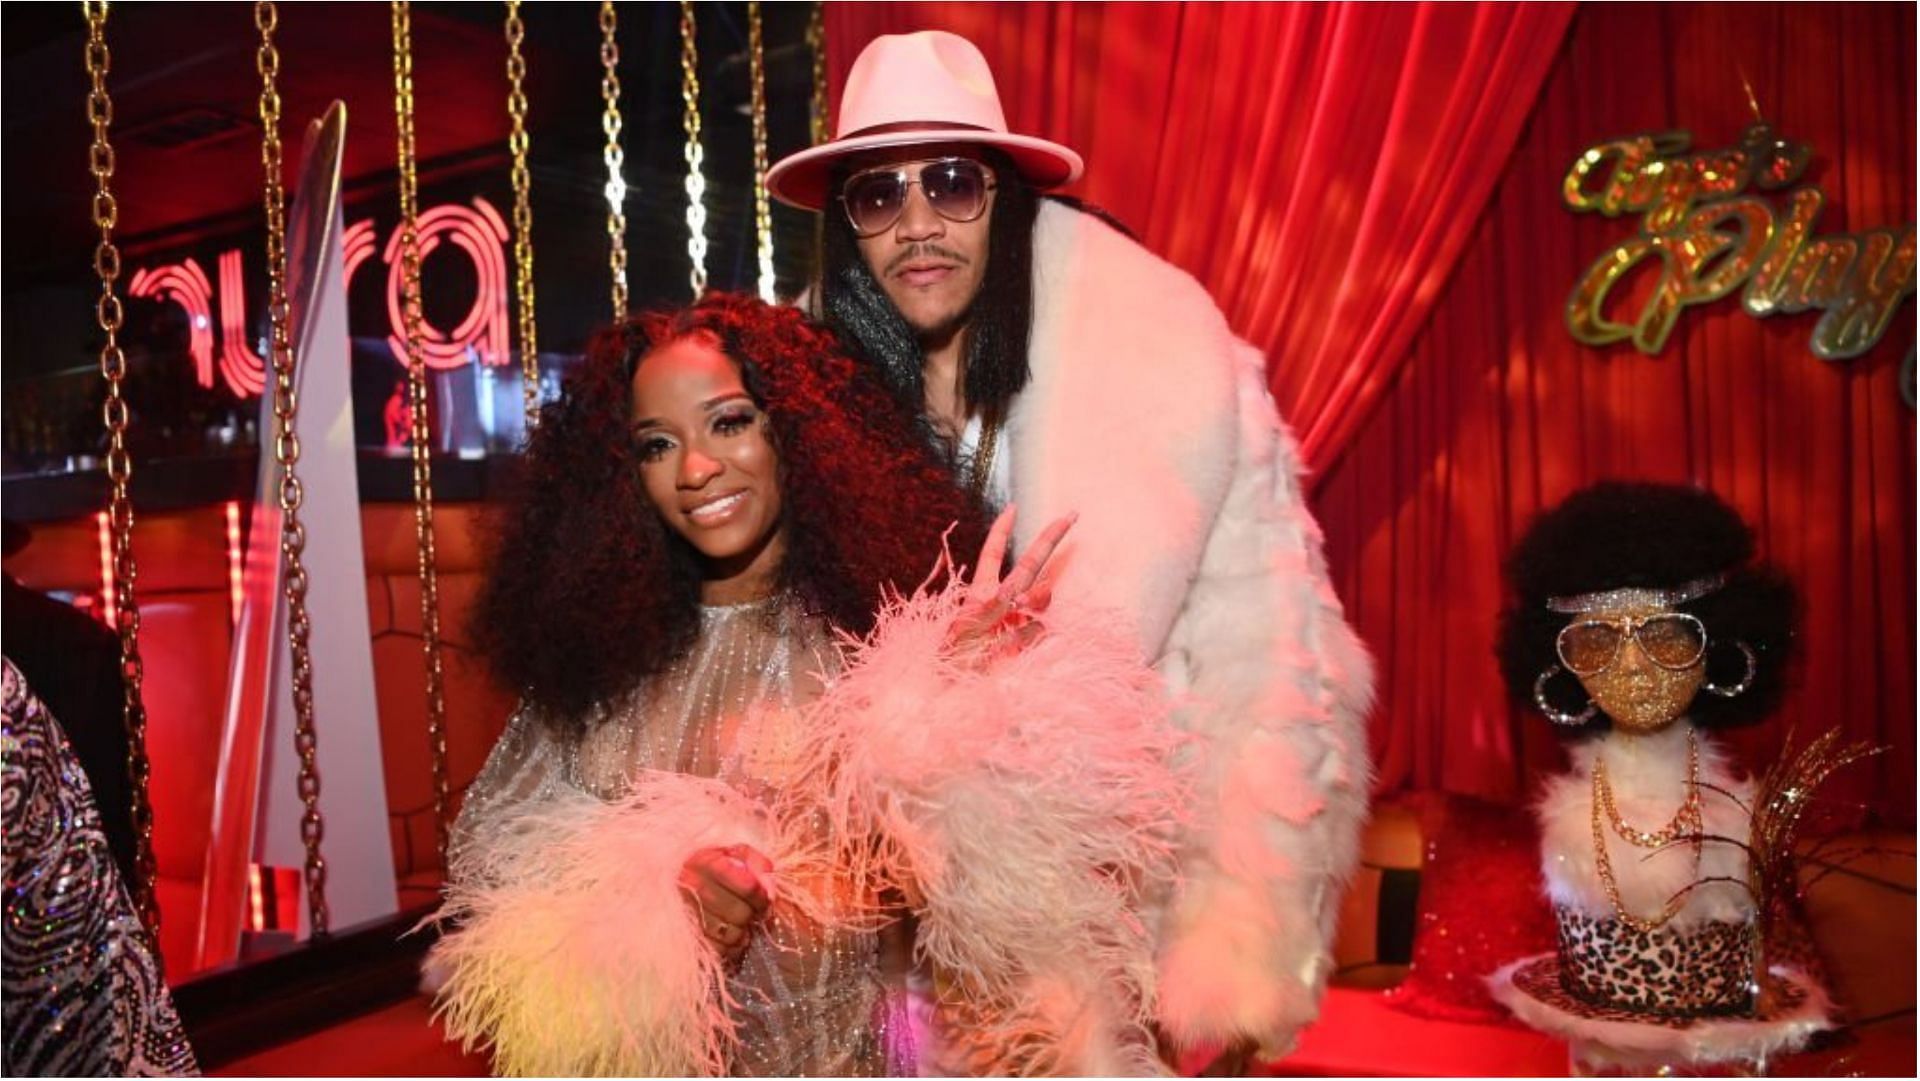 Toya Johnson and Robert Rushing recently got married (Image via Prince Williams/Getty Images)